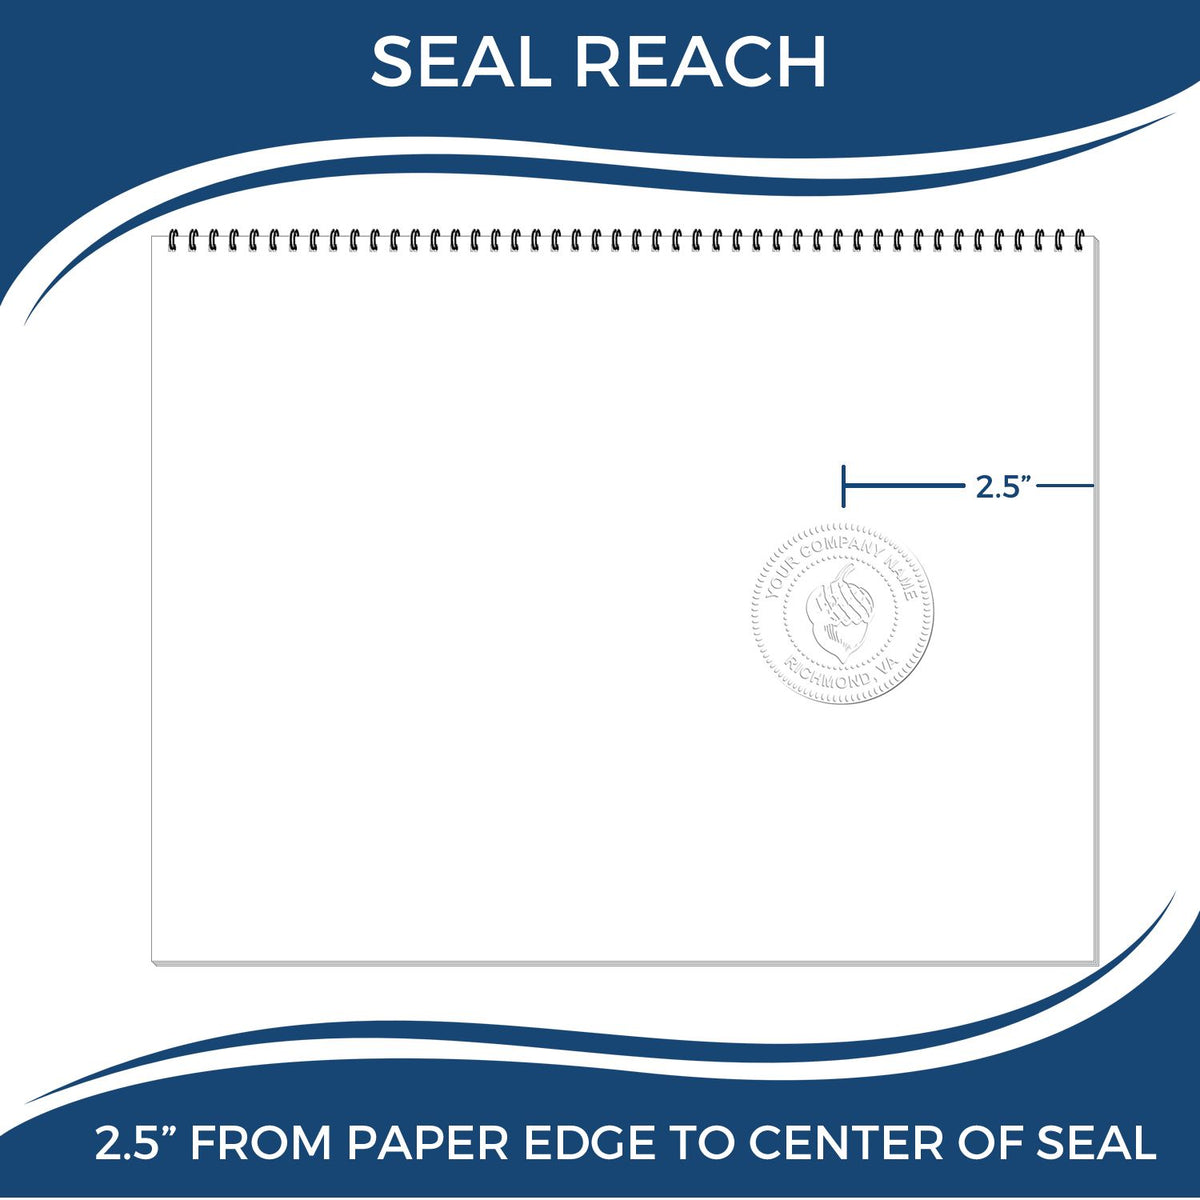 An infographic showing the seal reach which is represented by a ruler and a miniature seal image of the State of Virginia Long Reach Architectural Embossing Seal